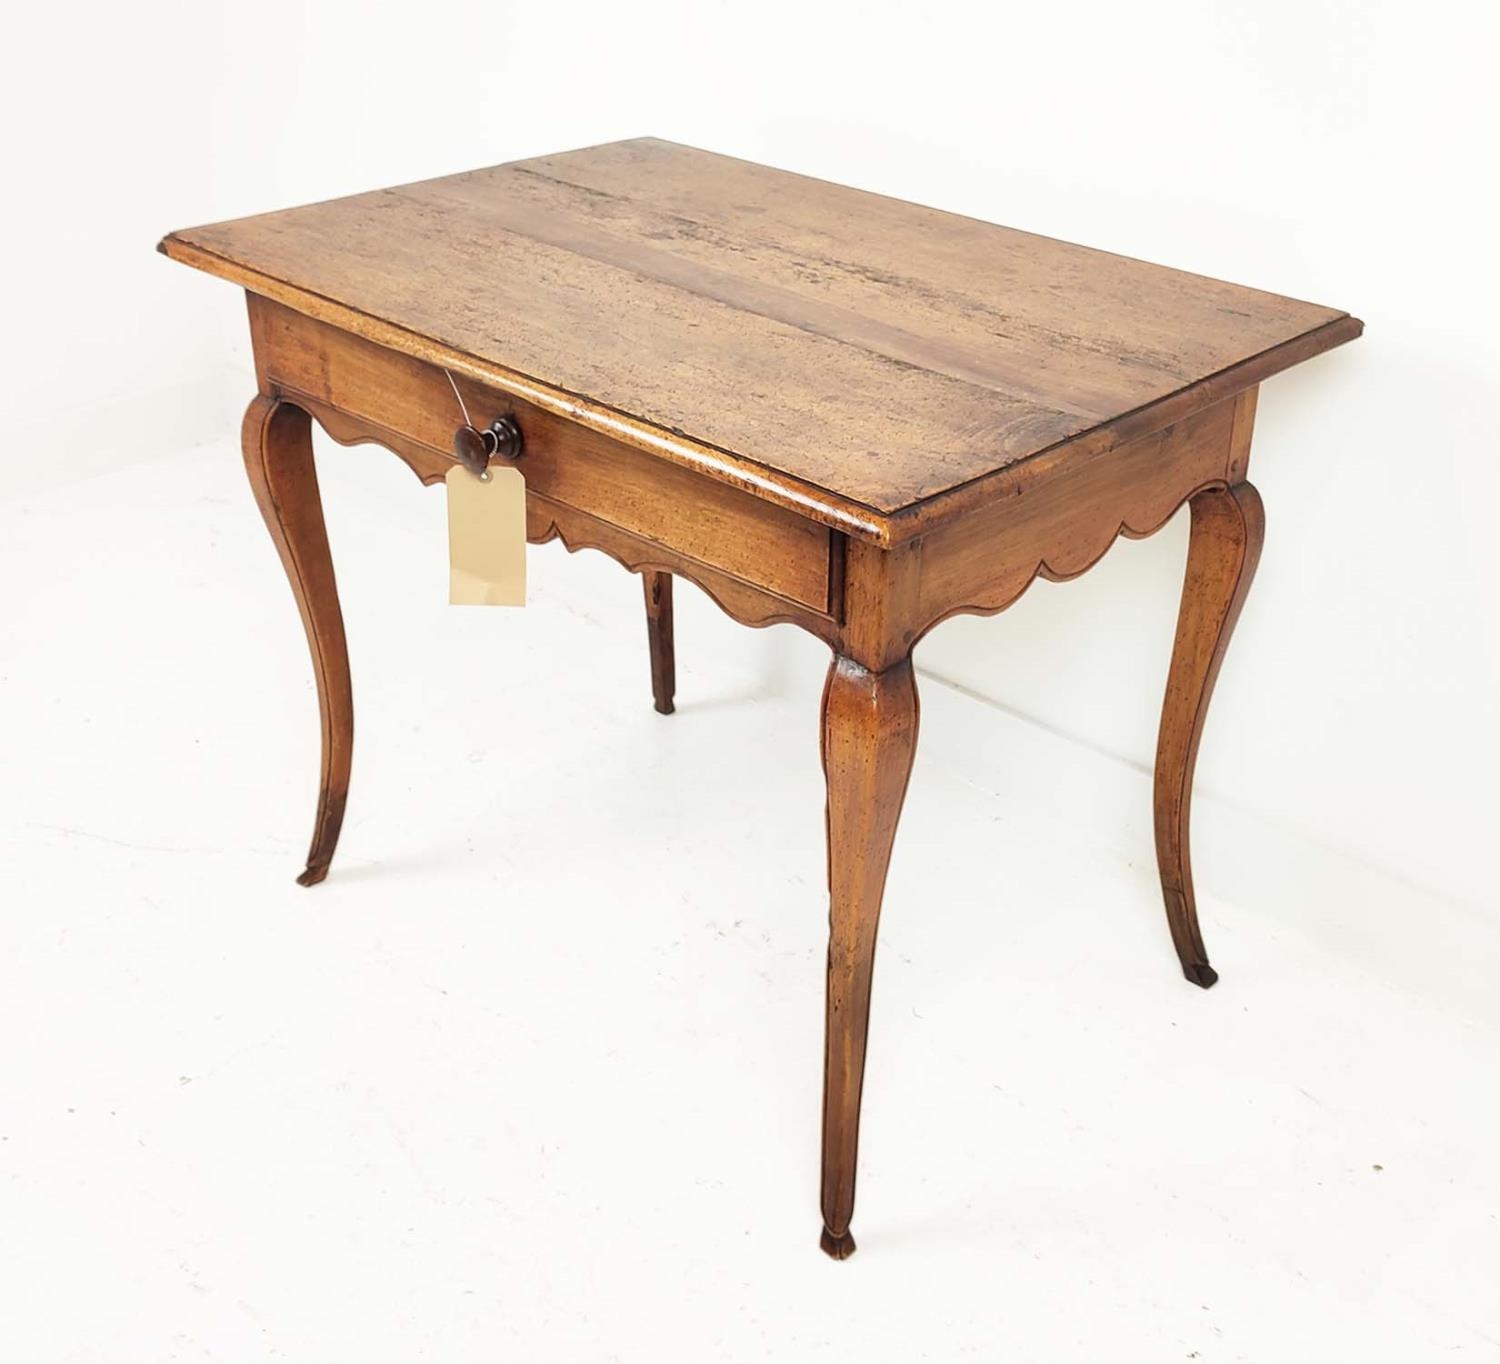 SIDE TABLE, late 18th/early 19th century French provincial walnut with single drawer, 97cm L x - Image 3 of 9